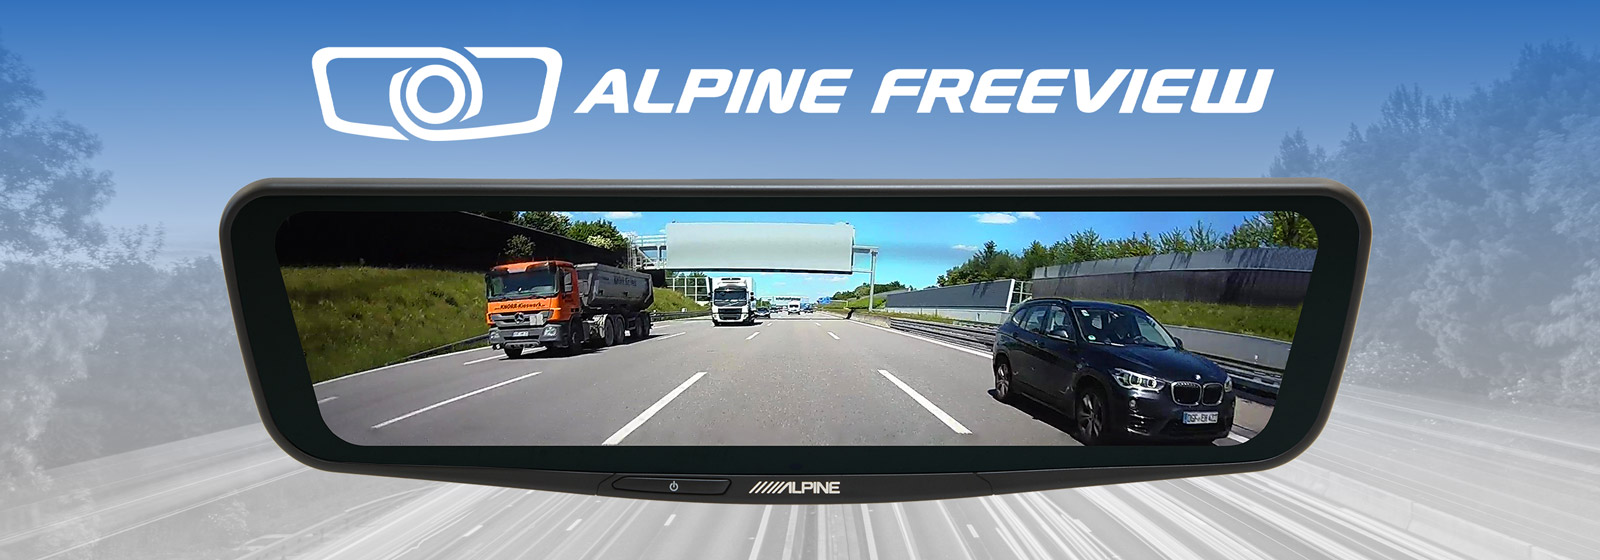 Alpine Digital Mirror - A New Level of Convenience and Safety